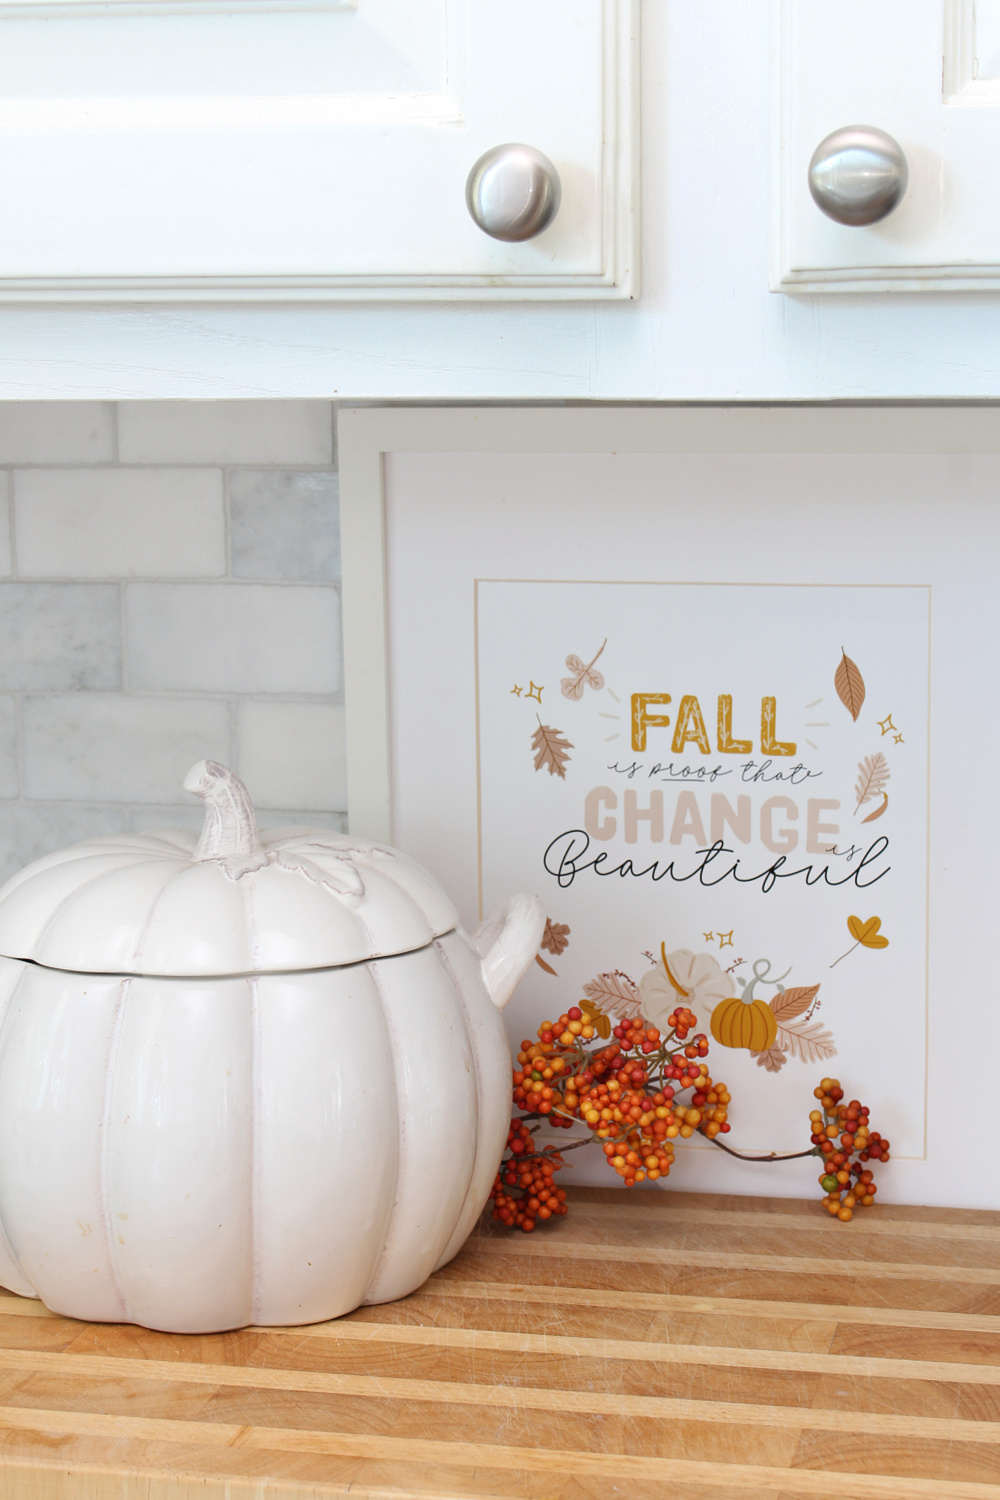 Free fall printable displayed in the kitchen